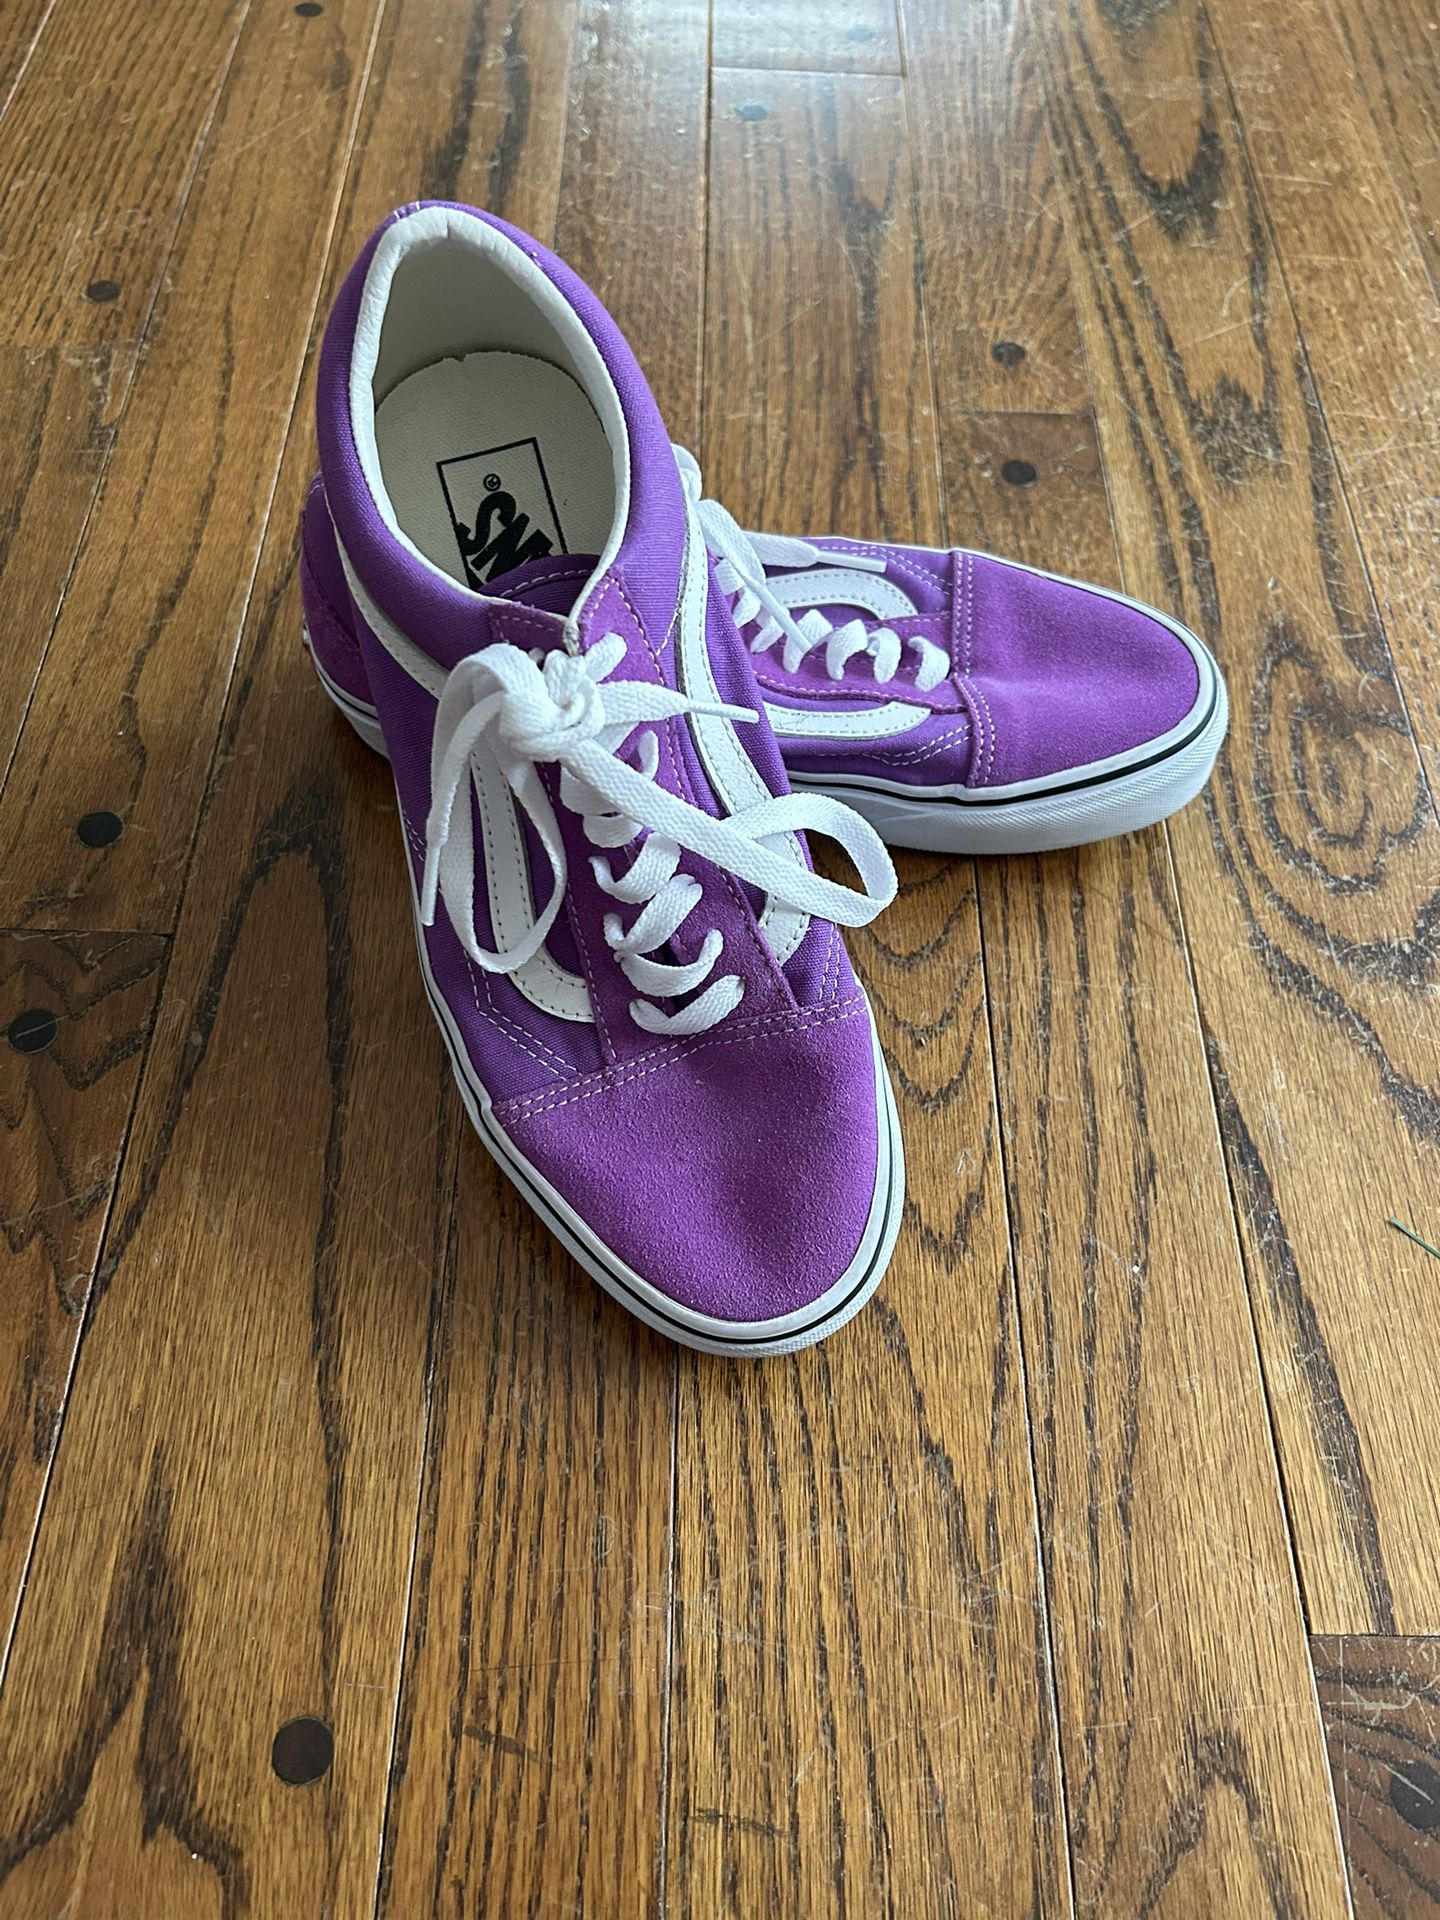 Nice Gently Used 1 Time Vans Size 6.5 Off The Wall Old Skool Purple Shoes